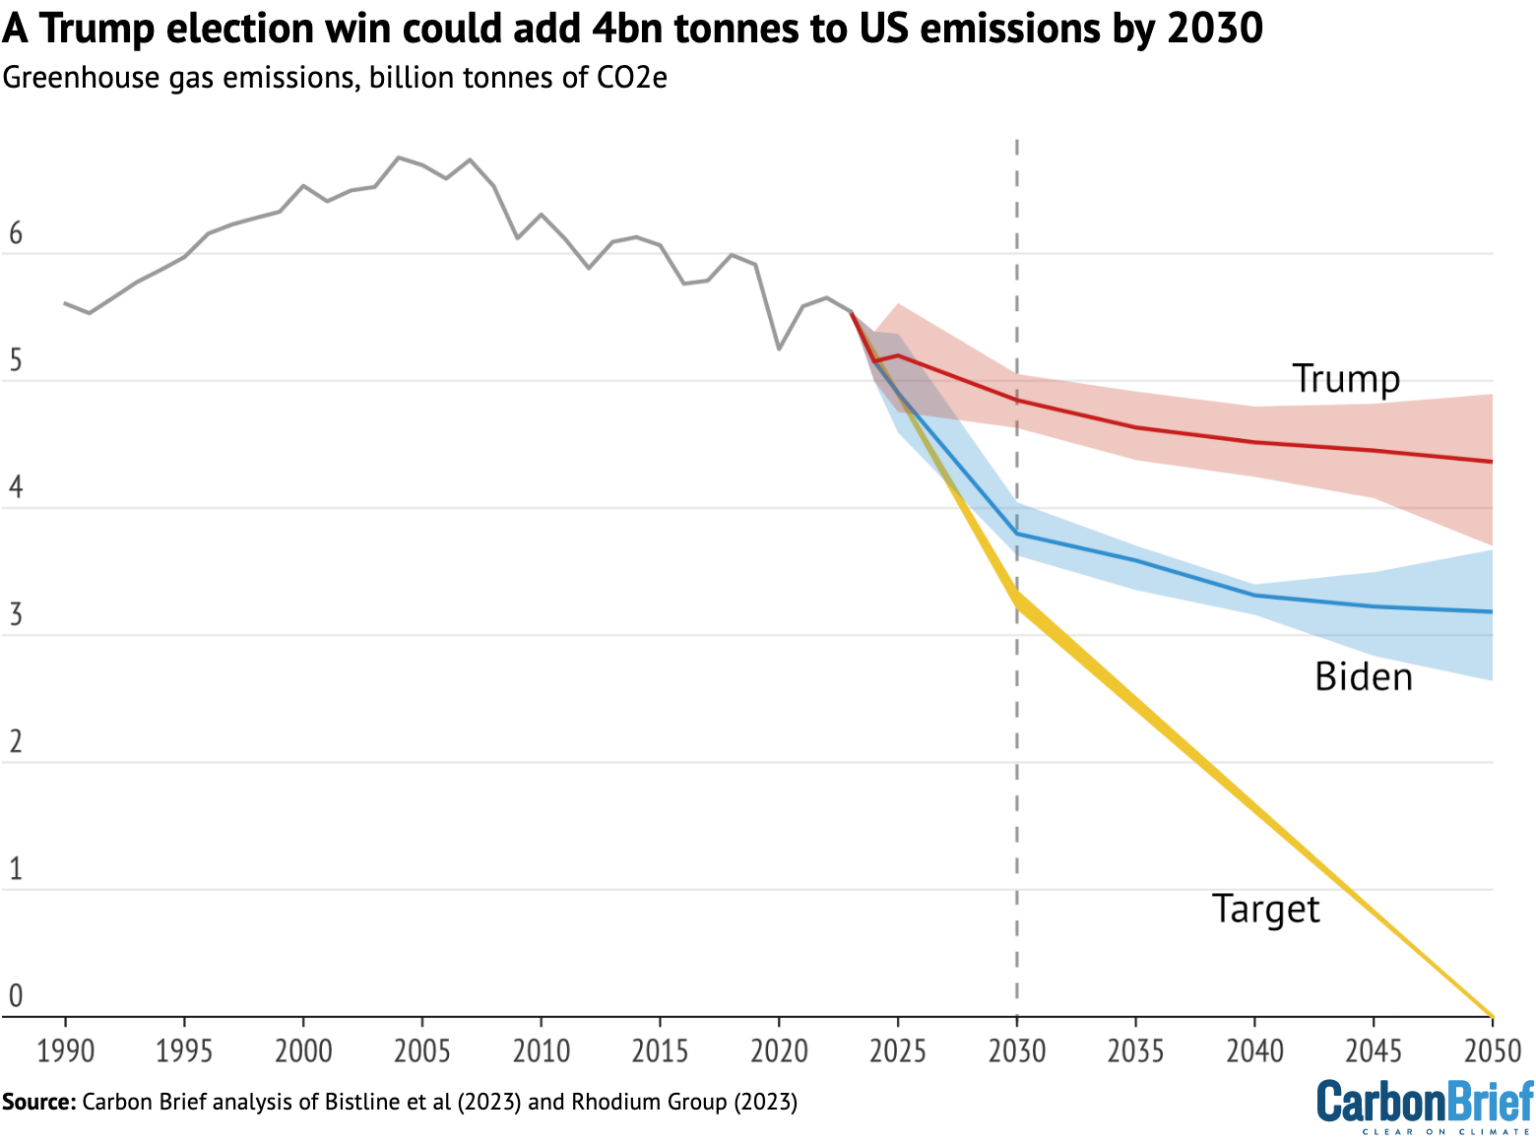 Black line: Historical US greenhouse gas emissions 1990-2022, billions of tonnes of CO2 equivalent. Red line and area: Projected emissions under the “Trump” scenario where Biden’s key climate policies are eliminated. Blue line and area: Projected emissions under the “Biden” scenario with the IRA and other key climate policies. Yellow: US climate target trajectory pledged by the Biden administration (50-52% by 2030). The range for each projection corresponds to results from six different models and uncertainty around economic growth, as well as the costs for low-carbon technologies and fossil fuels. Source: Carbon Brief analysis of modelling in Bistline et al. (2023) and Rhodium Group (Taking stock 2023). Chart by Carbon Brief.